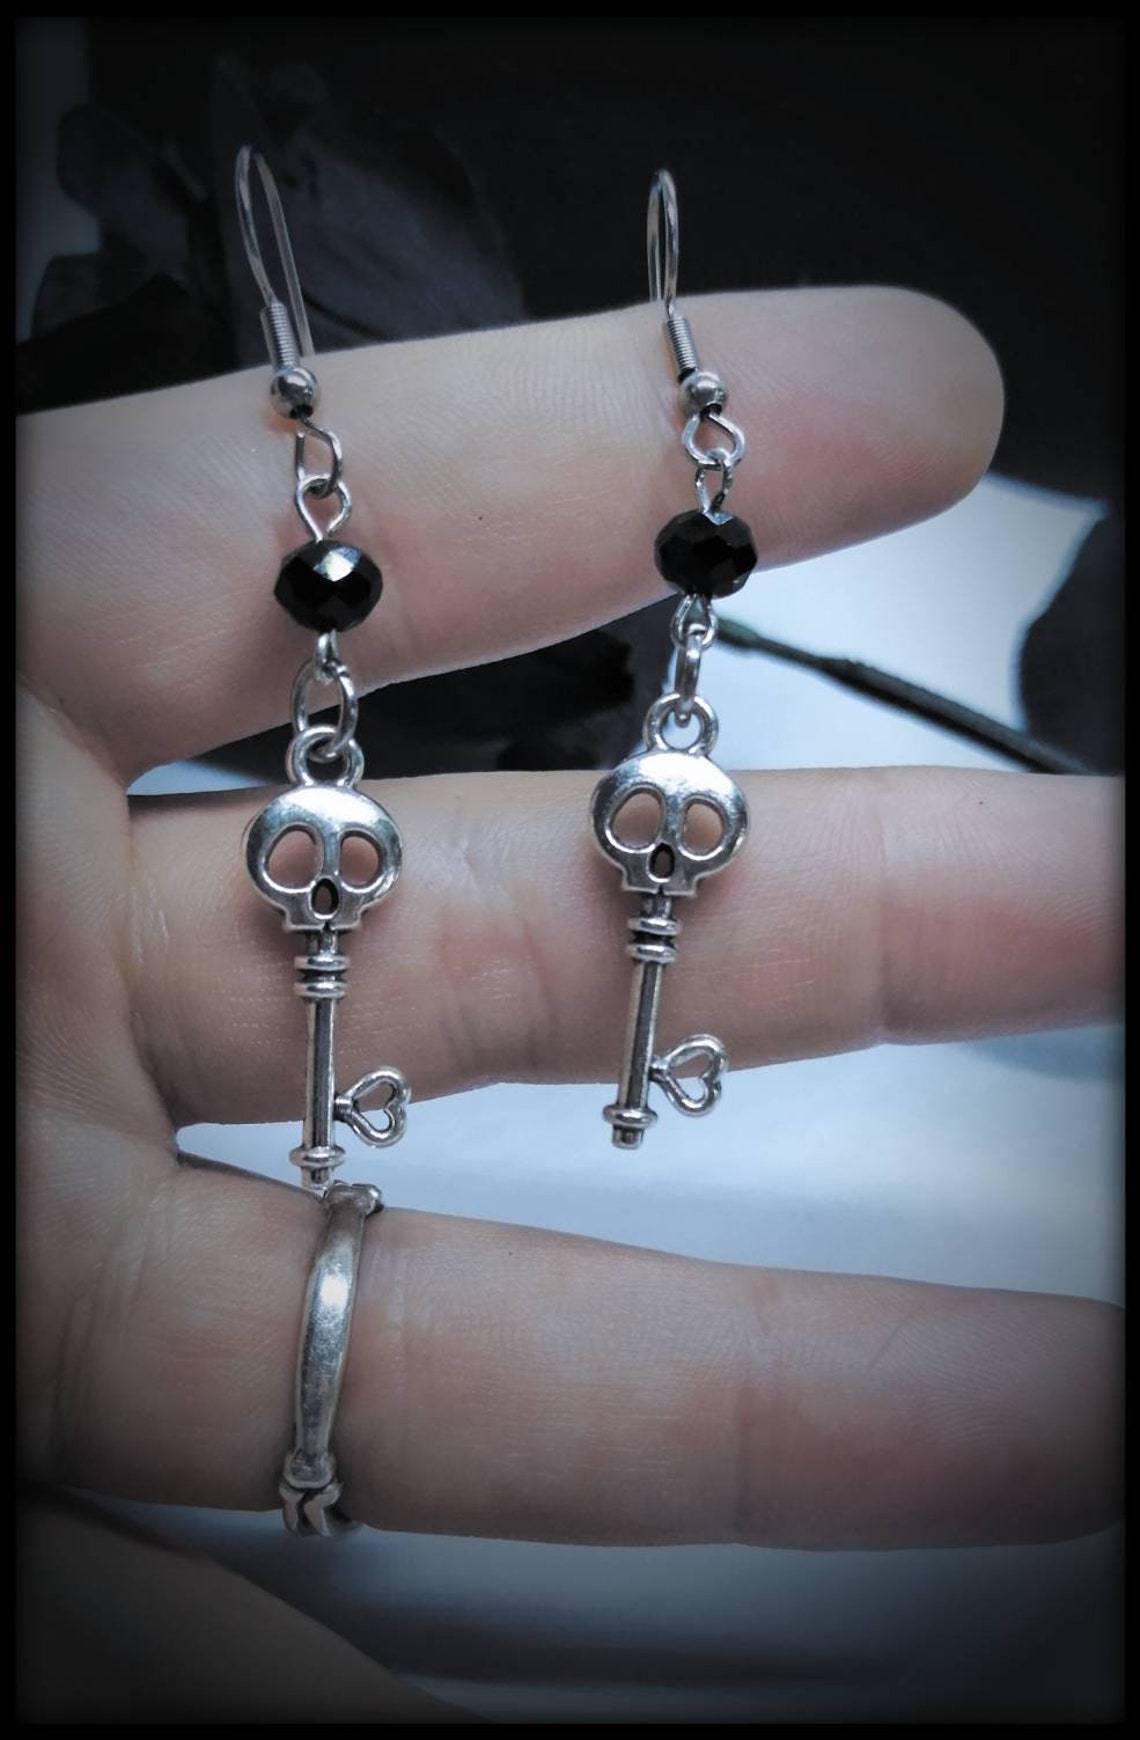 A pair of CJ Fashion Gothic Skull Earrings Jewelry Gift with a key on them.